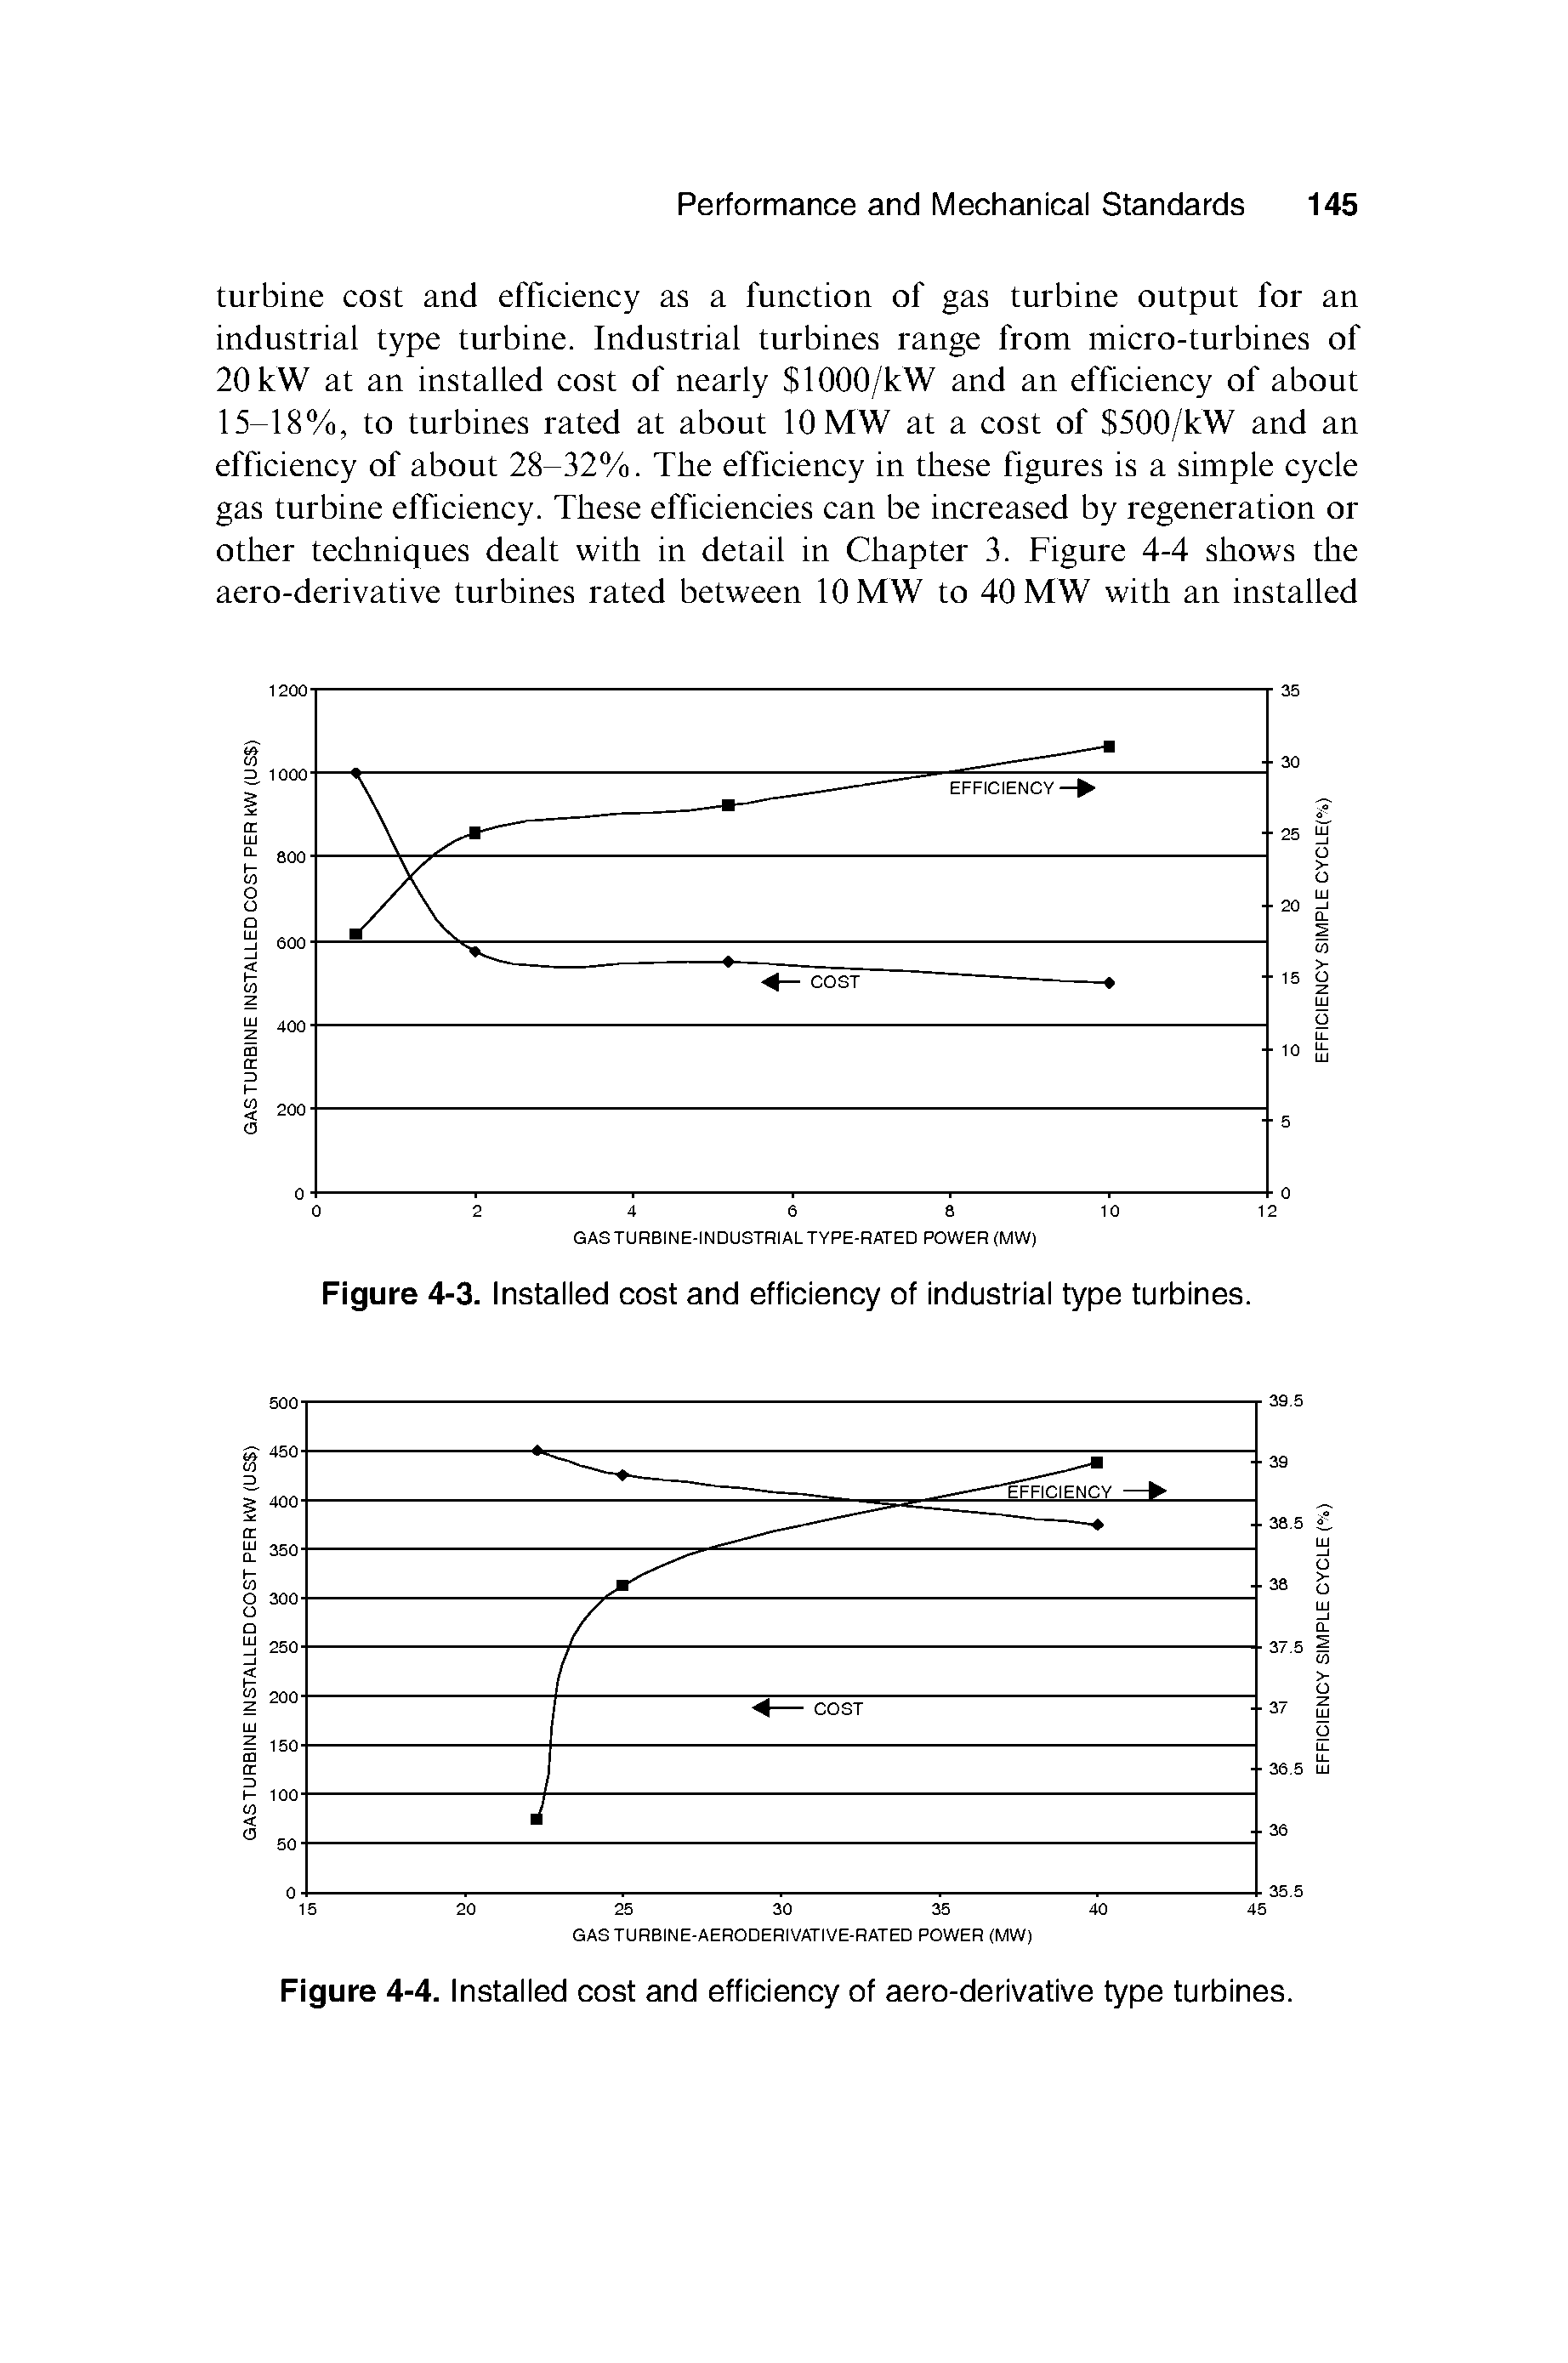 Figure 4-4. Installed cost and efficiency of aero-derIvatIve type turbines.